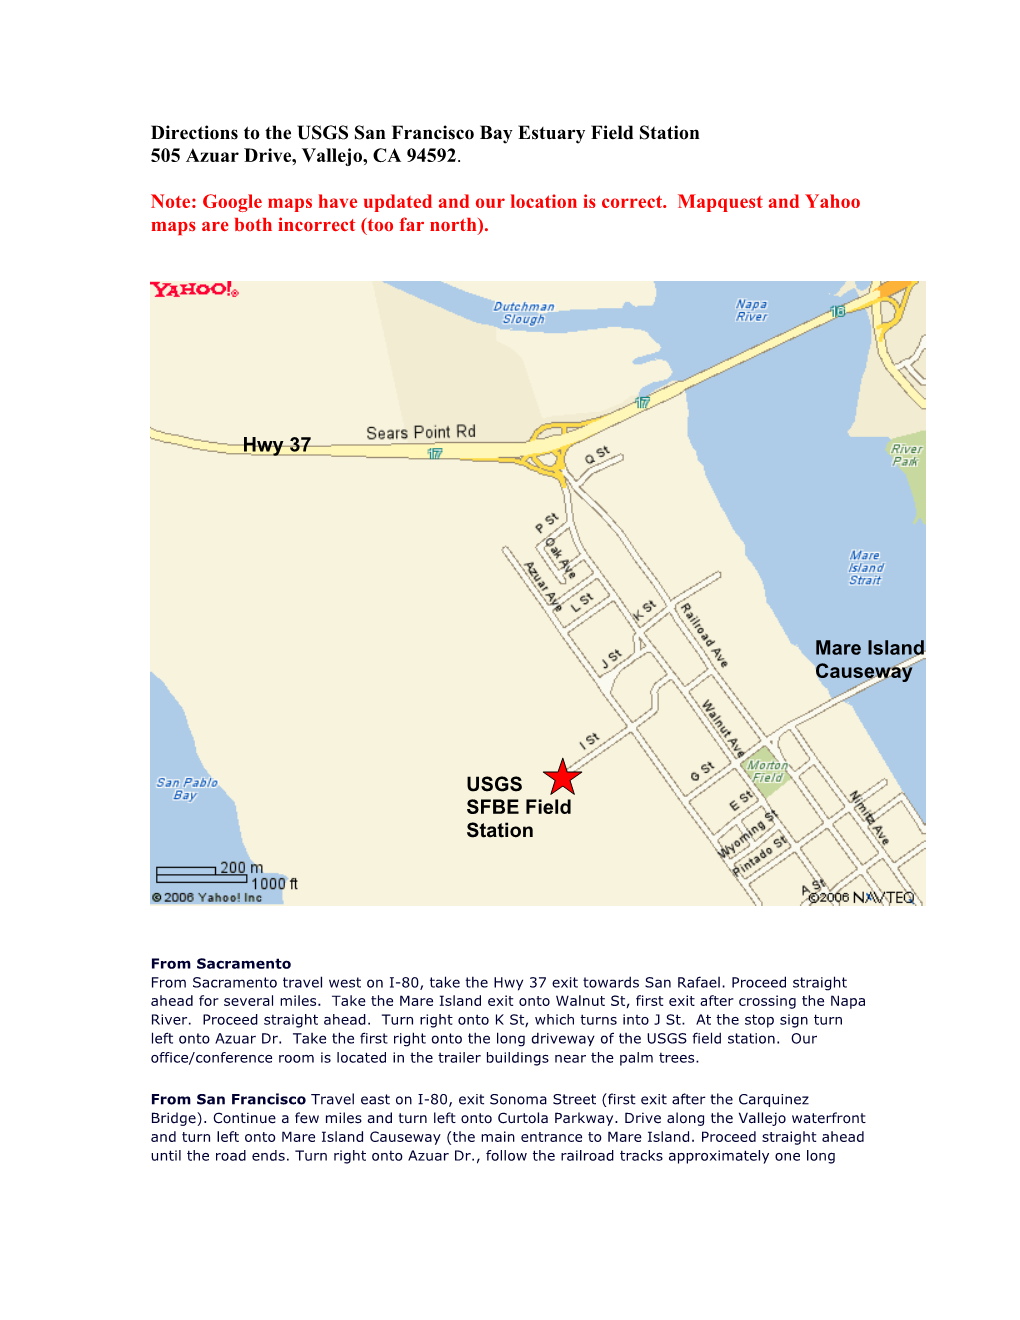 Directions to the USGS San Francisco Bay Estuary Field Station 505 Azuar Drive, Vallejo, CA 94592